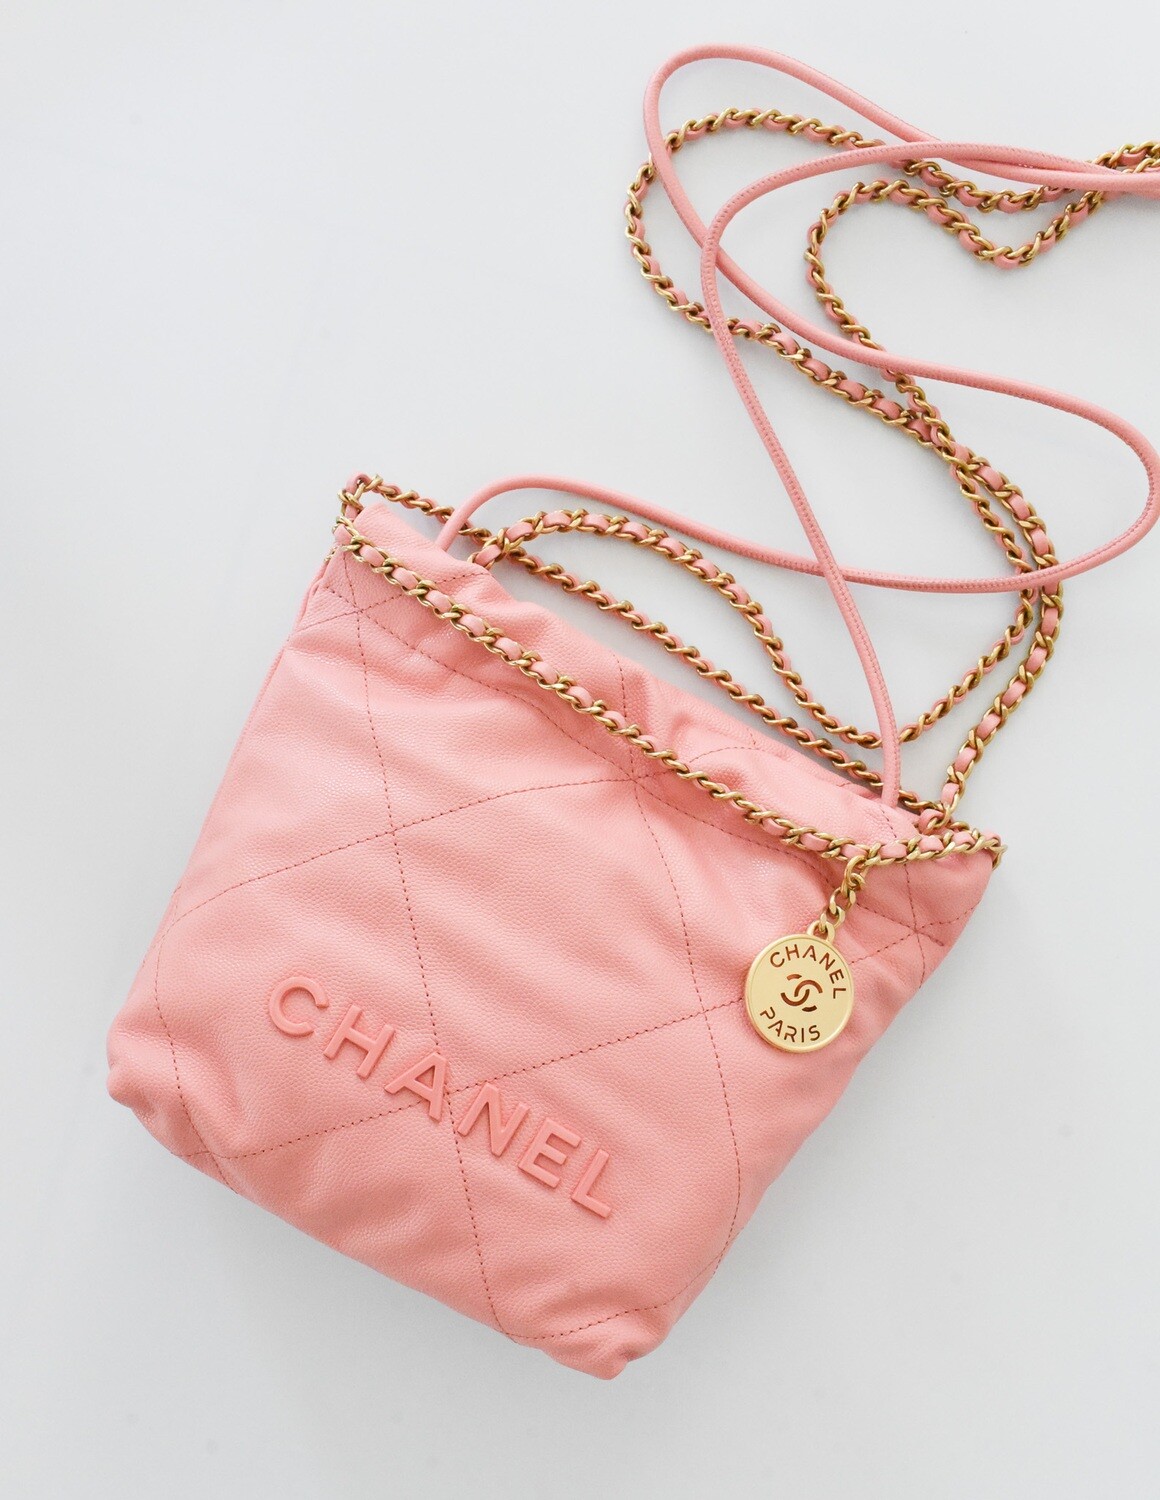 Chanel 22 Mini, Pink Caviar Leather With Gold Hardware, New in Box GA003P